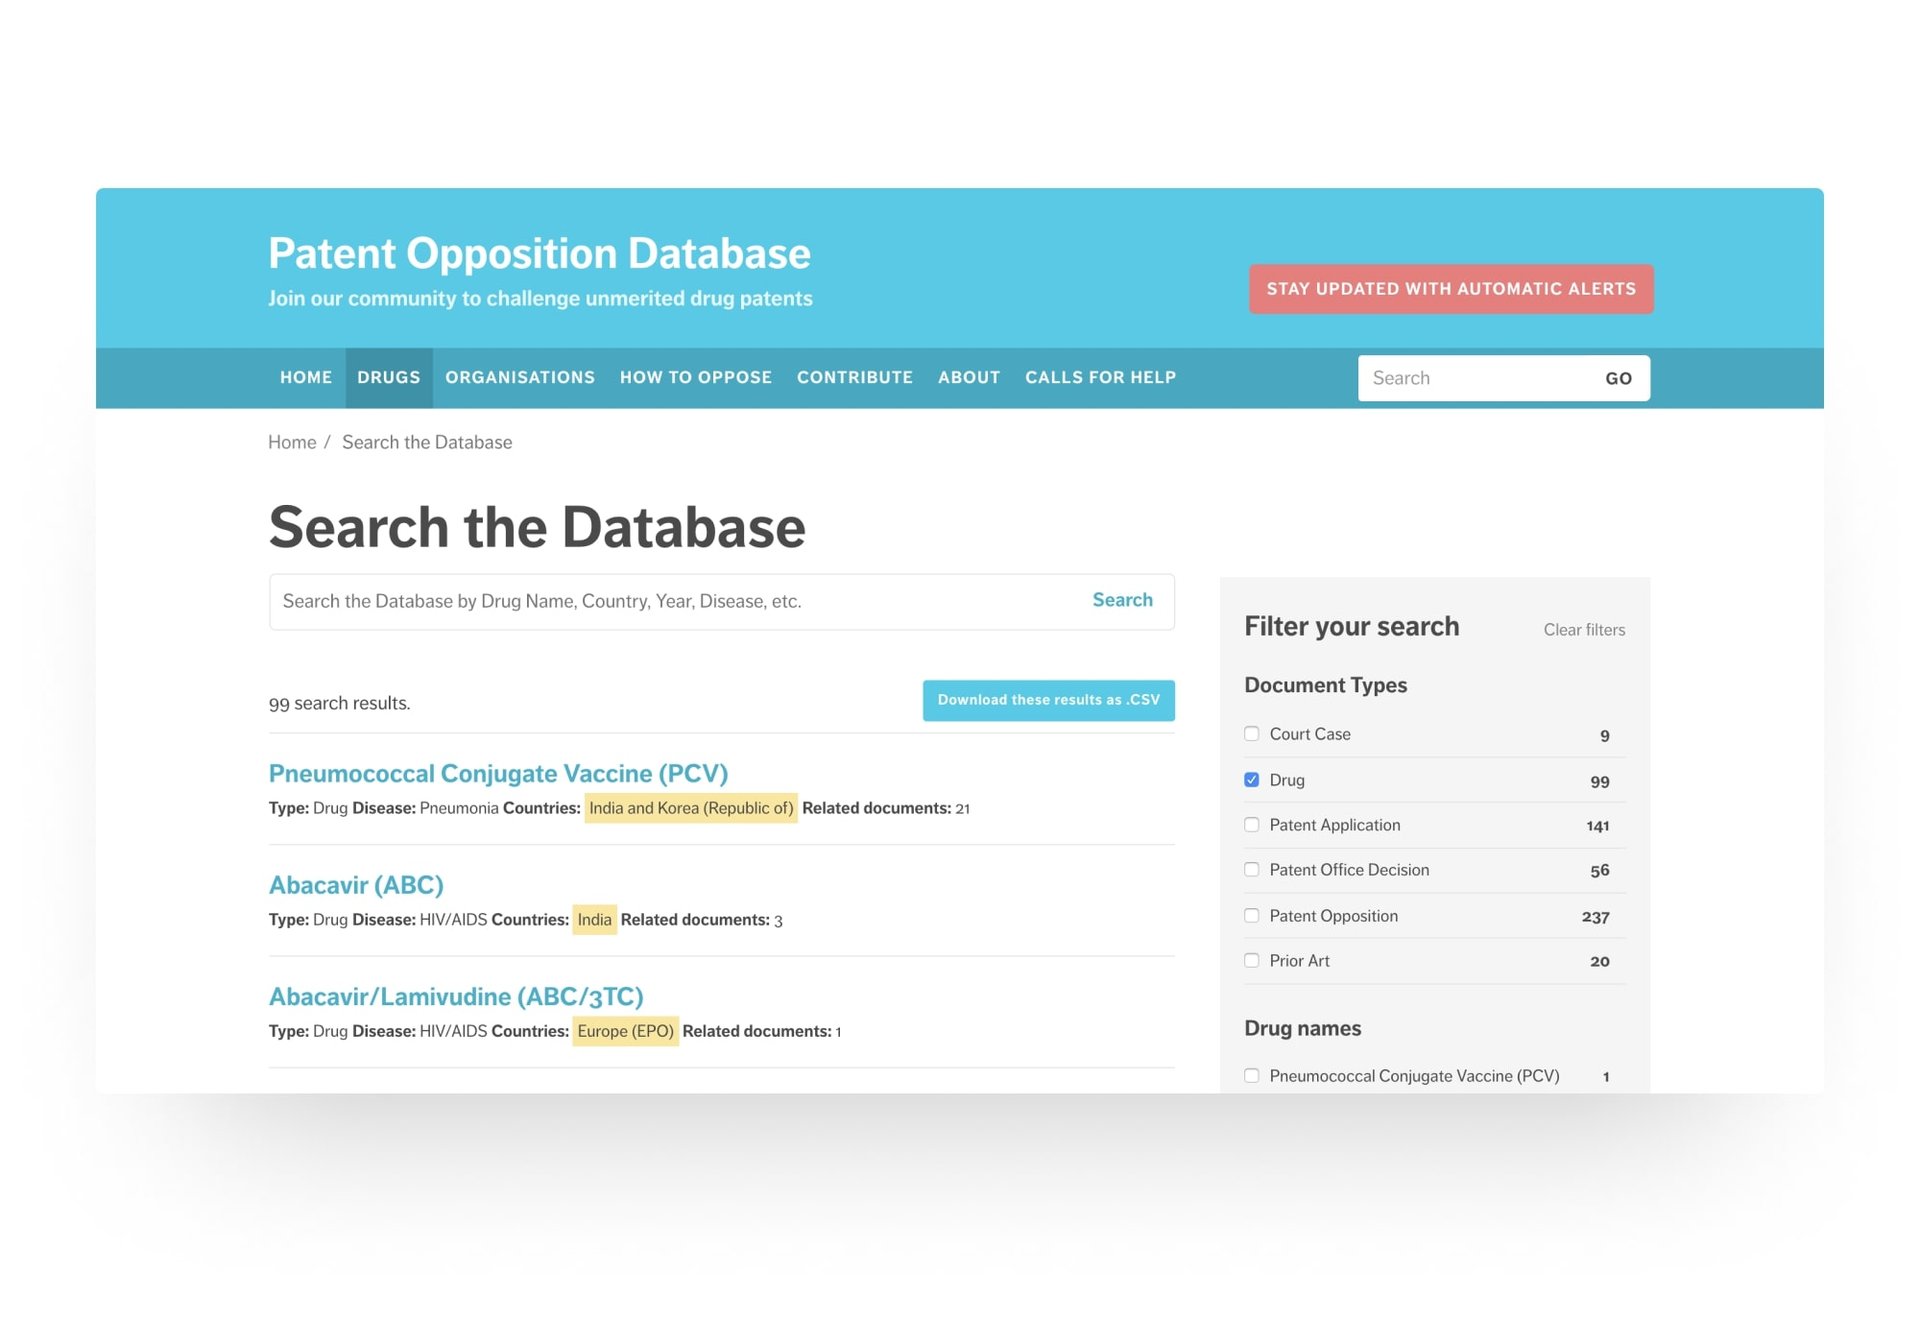 Search the Database feature